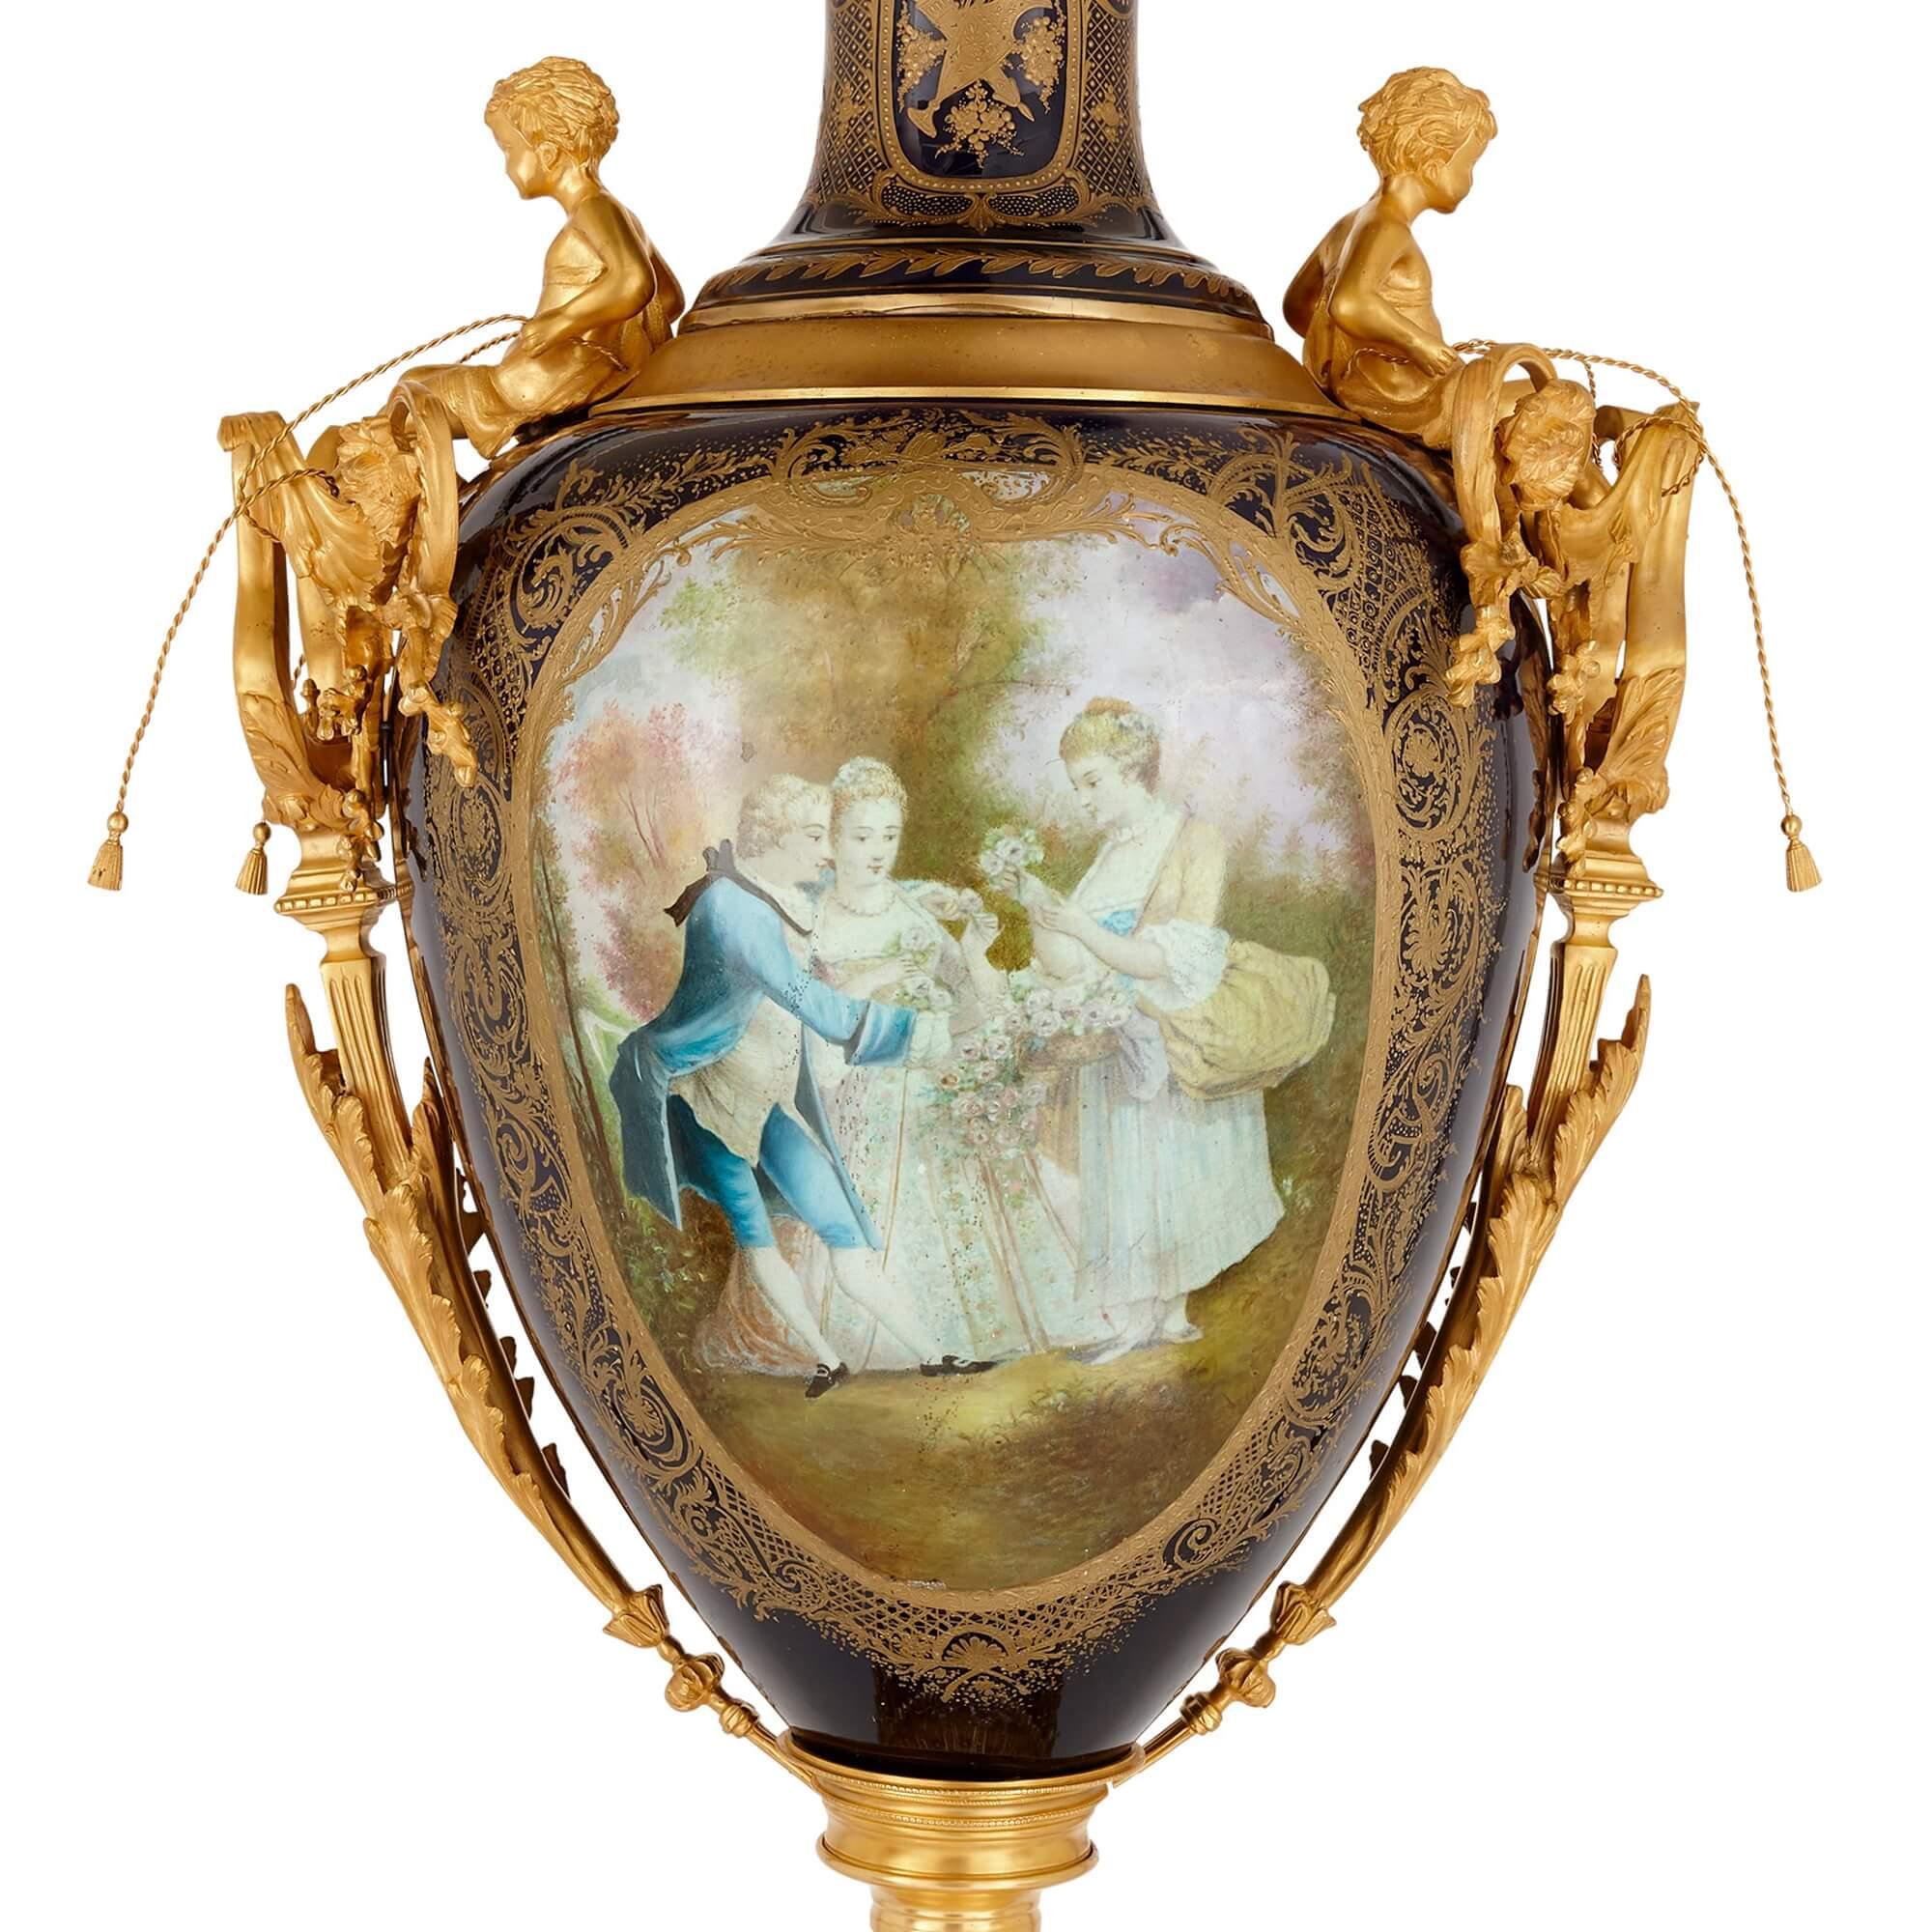 Neoclassical Large Sèvres-style Gilt-Bronze Mounted Porcelain Vase with Pedestal For Sale